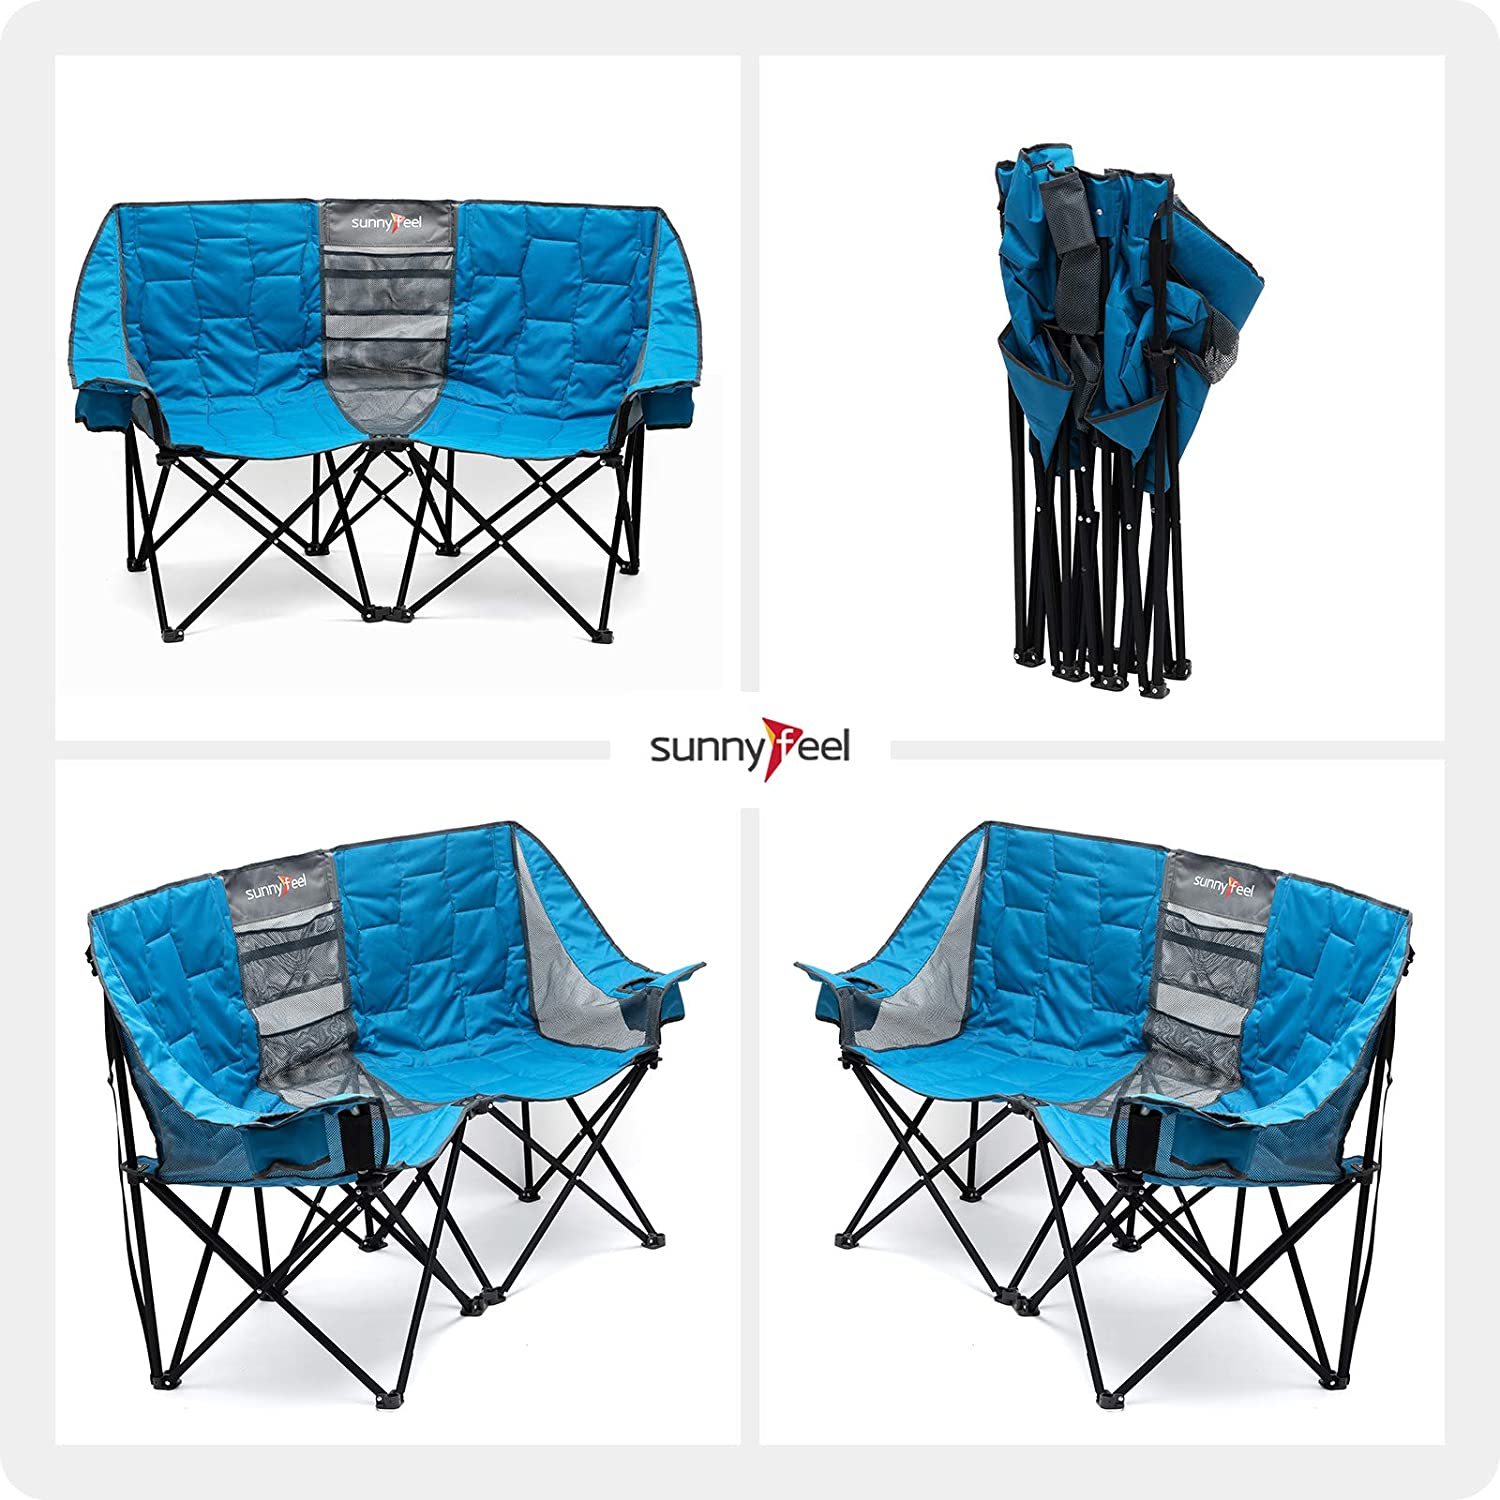 Sunnyfeel Folding Double Camping Chair, and 50 similar items